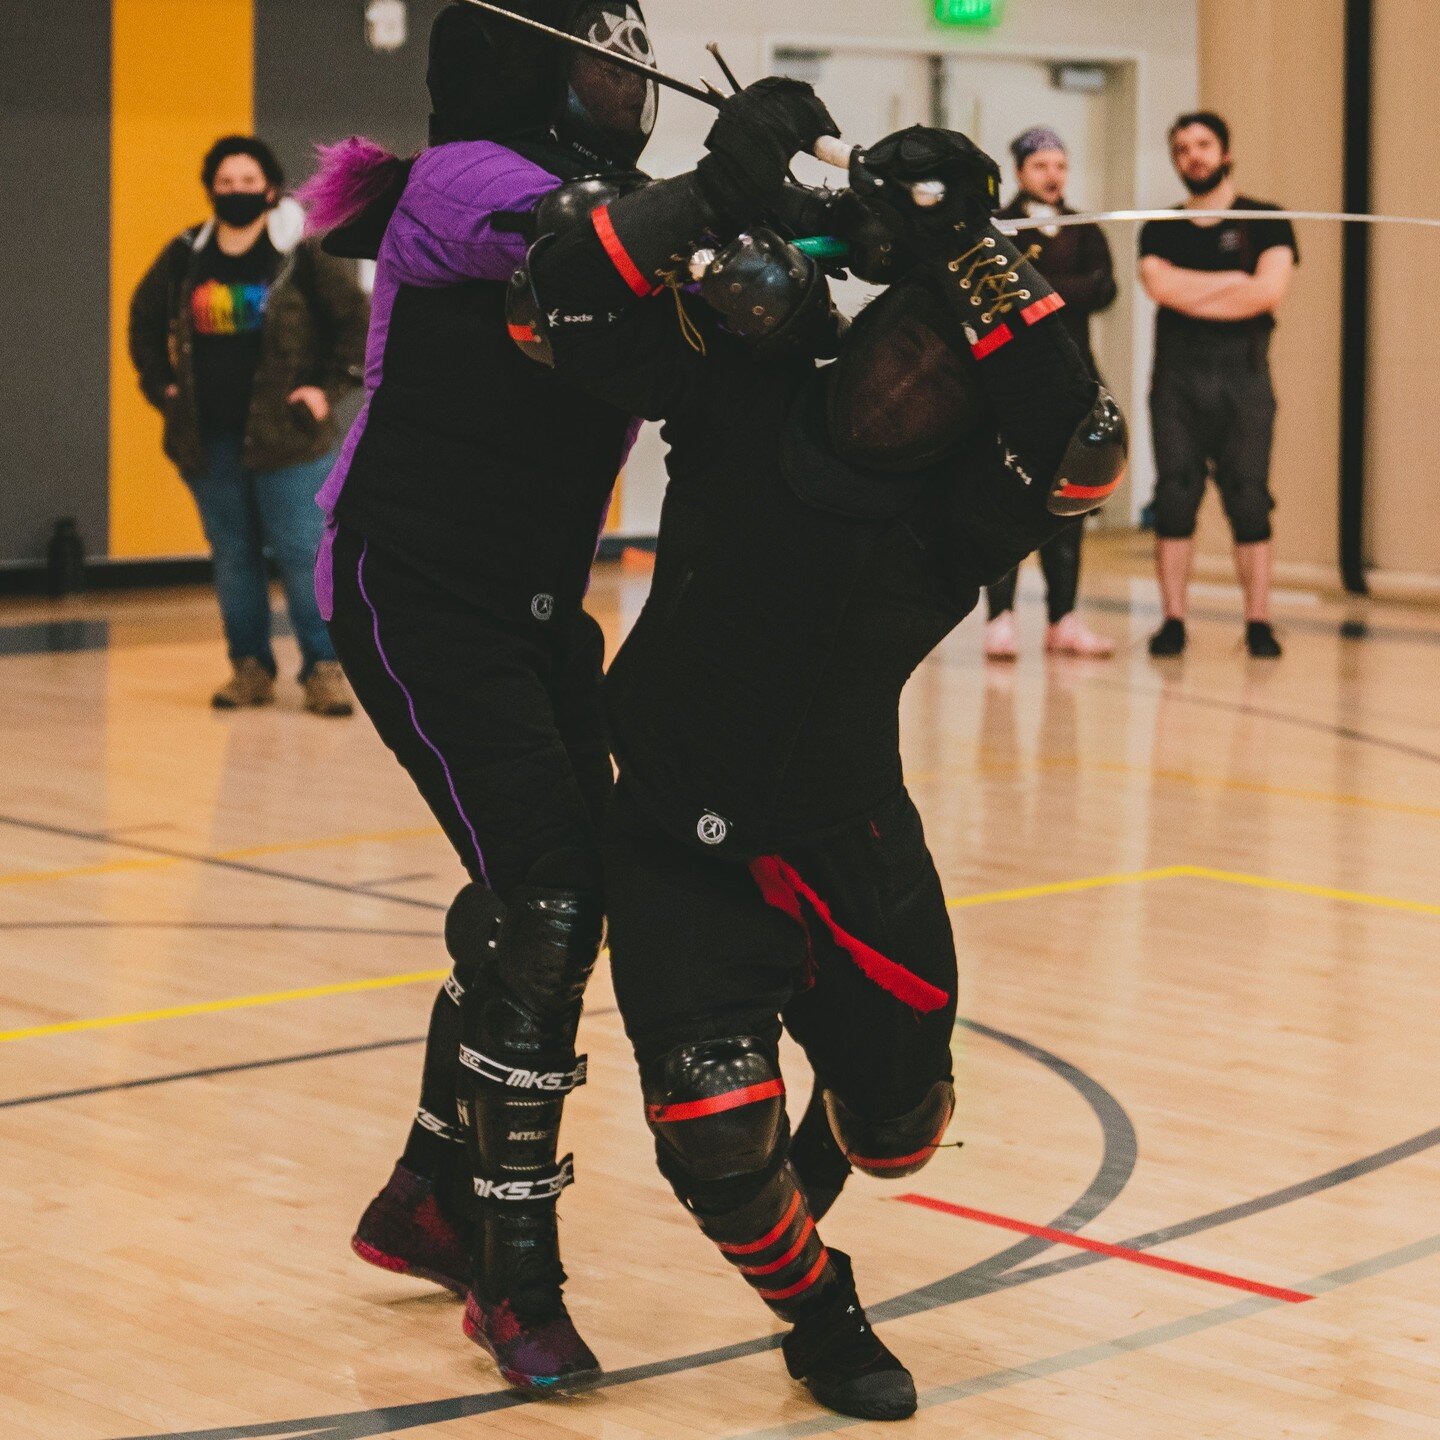 Veronica is a wickedly talented fencer. I love that @lisahaefnerphoto caught her wrenching her opponent's arm with the pommel of her sword.

#wma #hema #longsword #historicalfencing #martialarts #sword #swordfighting #ilovefencing #fencing